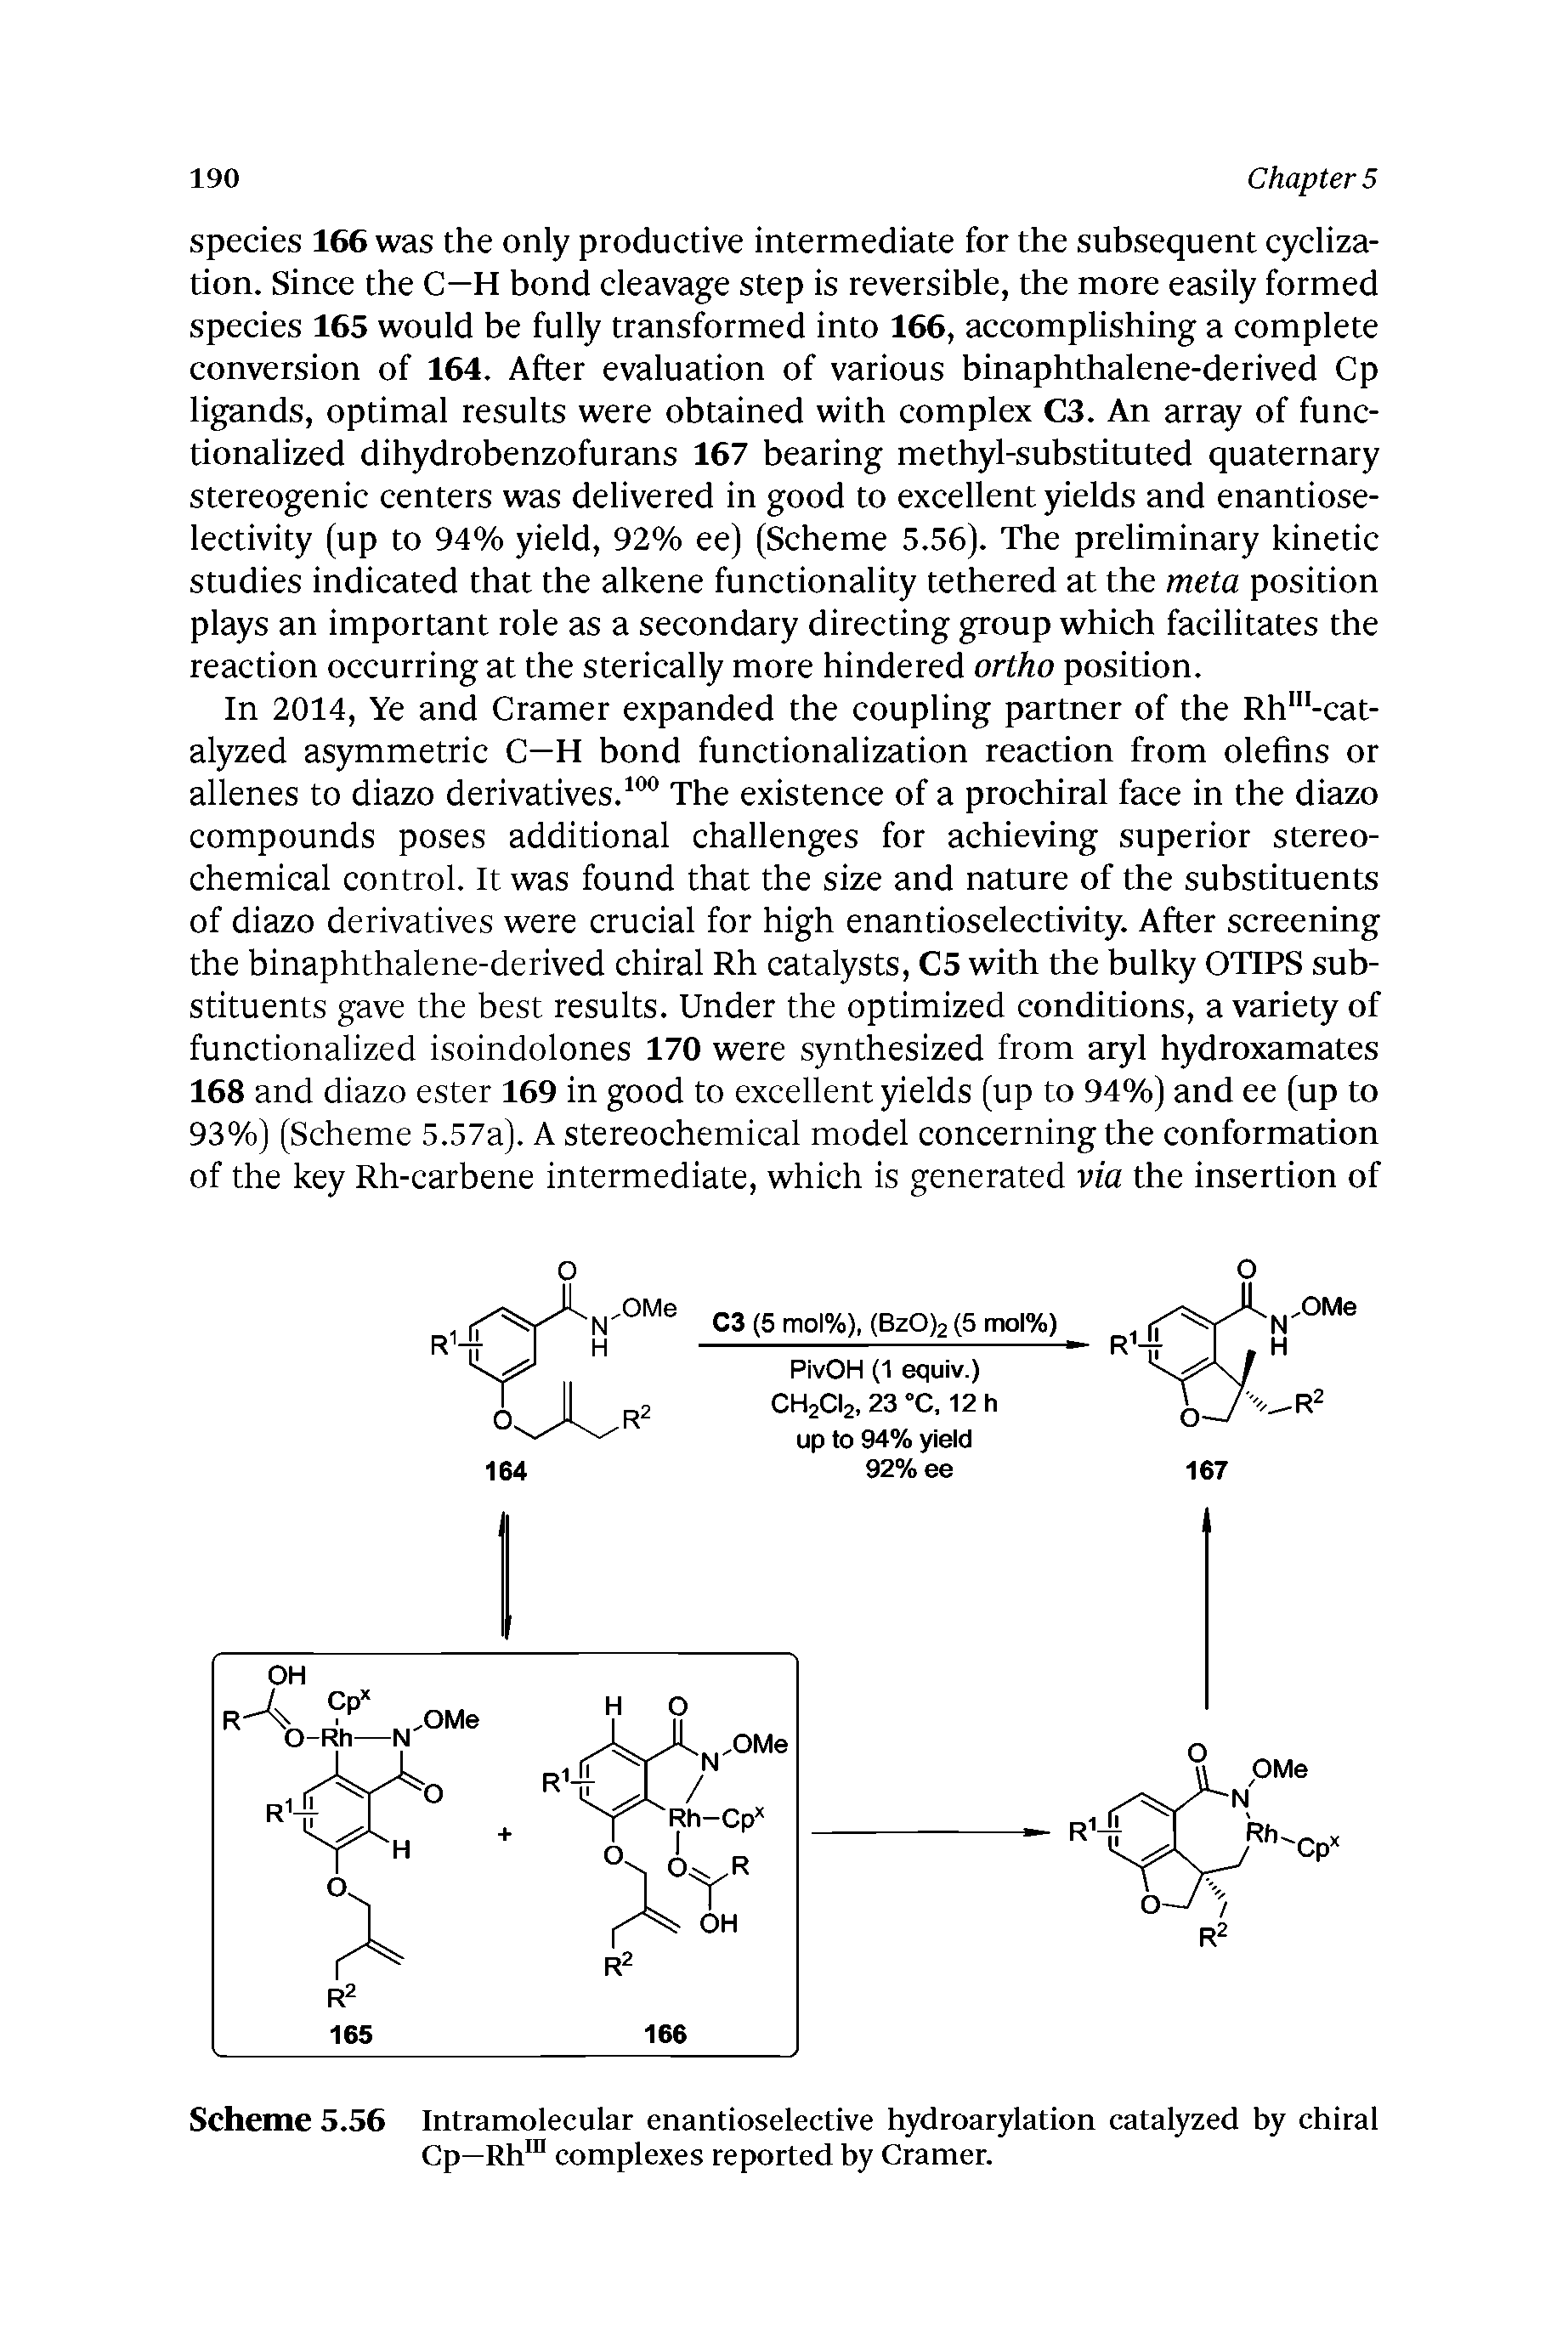 Scheme 5.56 Intramolecular enantioselective hydroarylation catalyzed by chiral Cp—Rh complexes reported hy Cramer.